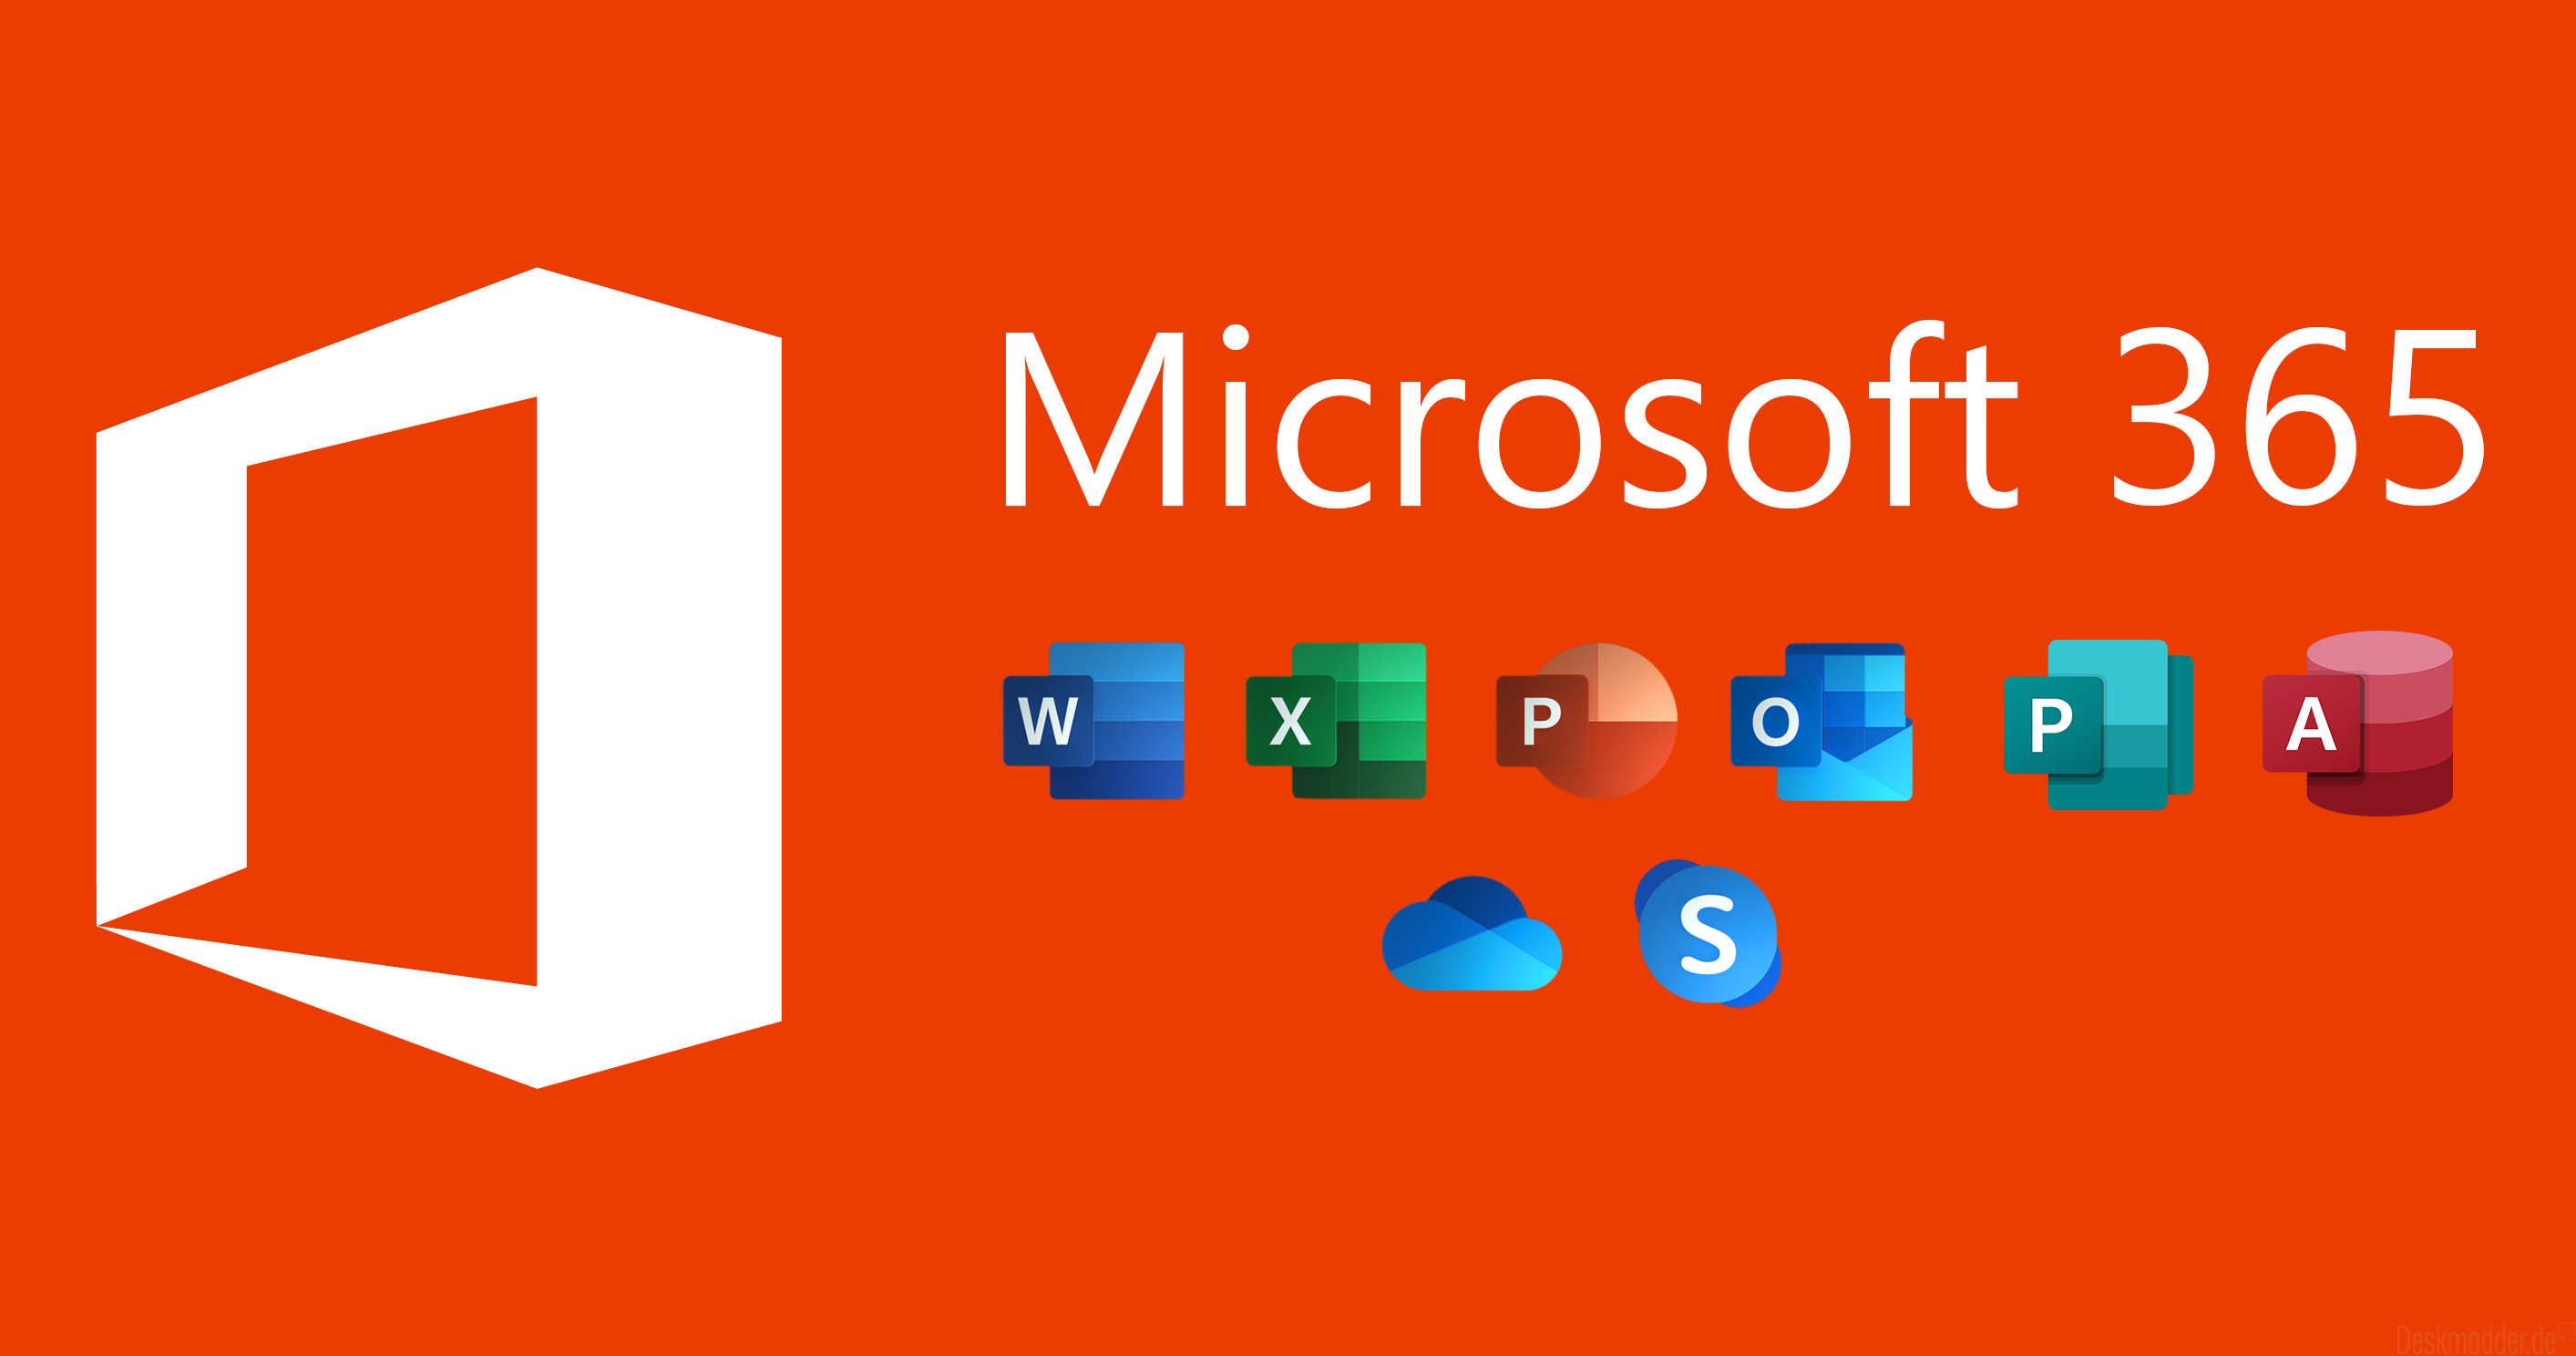 Microsoft: MS 365, Word, Excel, PowerPoint, Skype, Outlook, Publisher, Access, OneDrive. 2830x1490 HD Wallpaper.